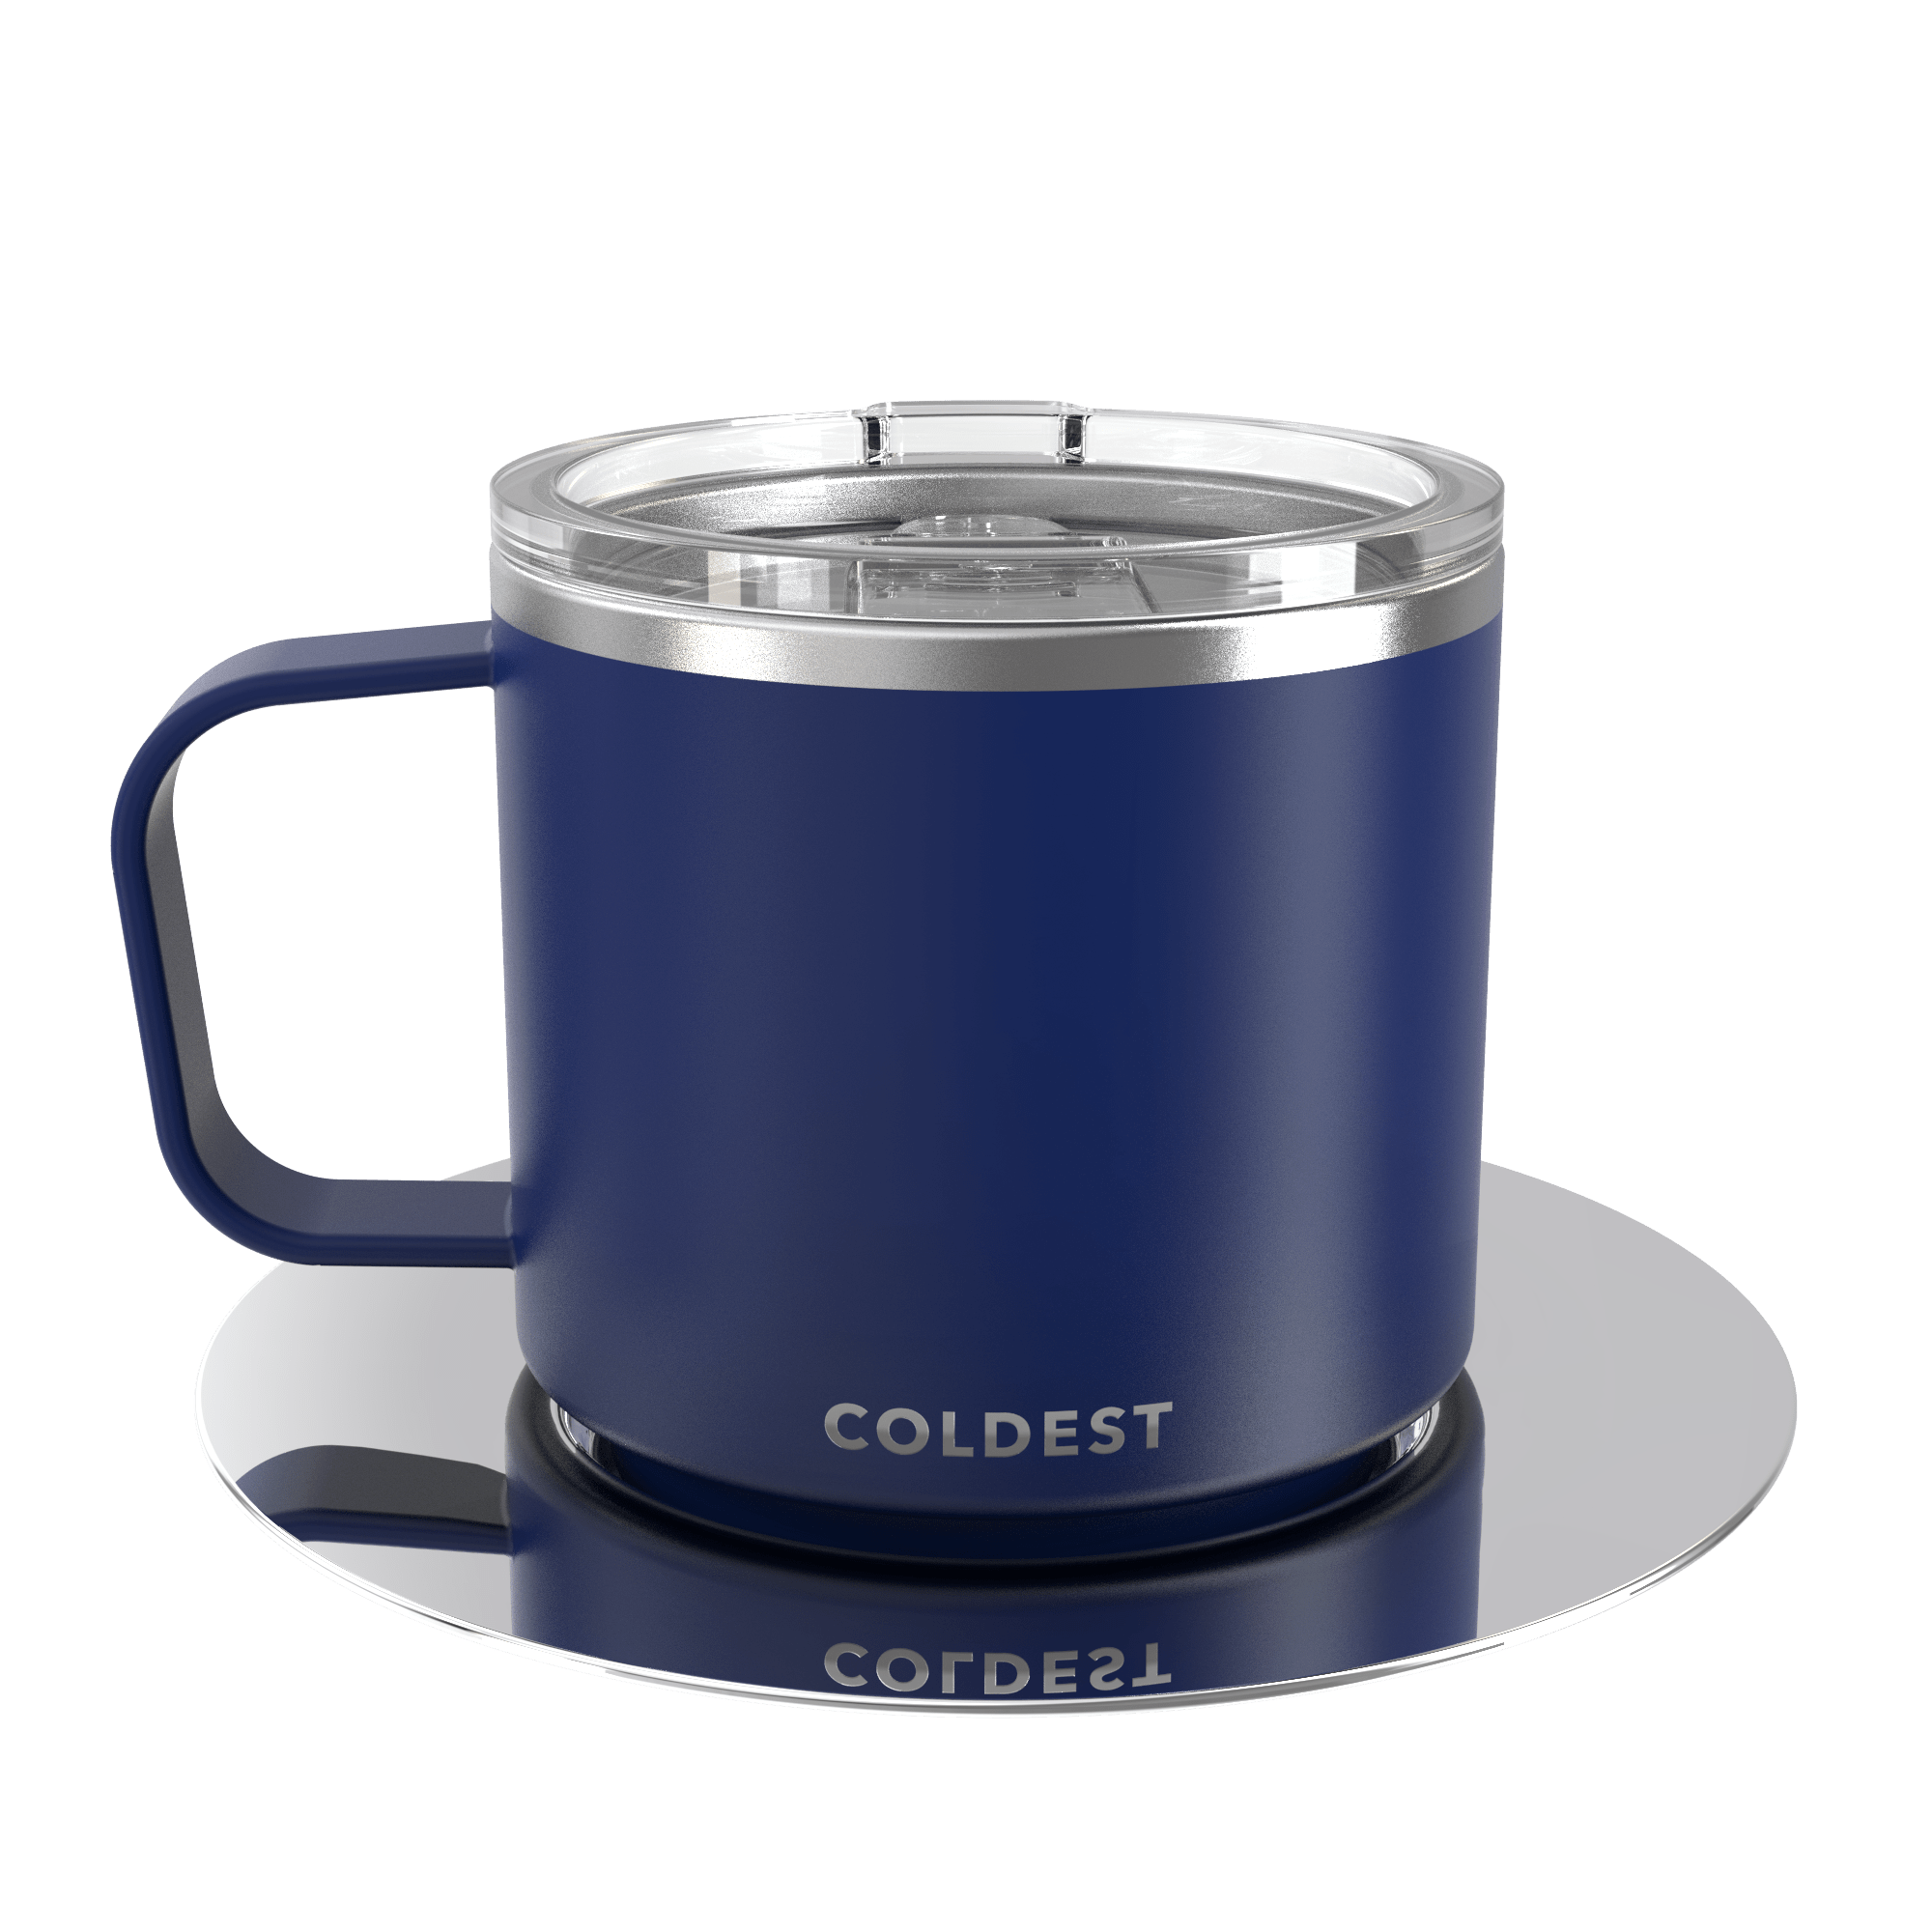 The Coldest Water Stackable Insulated Espresso Cup with Saucer  - Insulated Triple Wall Stainless Steel Travel Double Shot Espresso Coffee  Mug with Sliding Lid (4 oz, Stealth Black): Espresso Cups